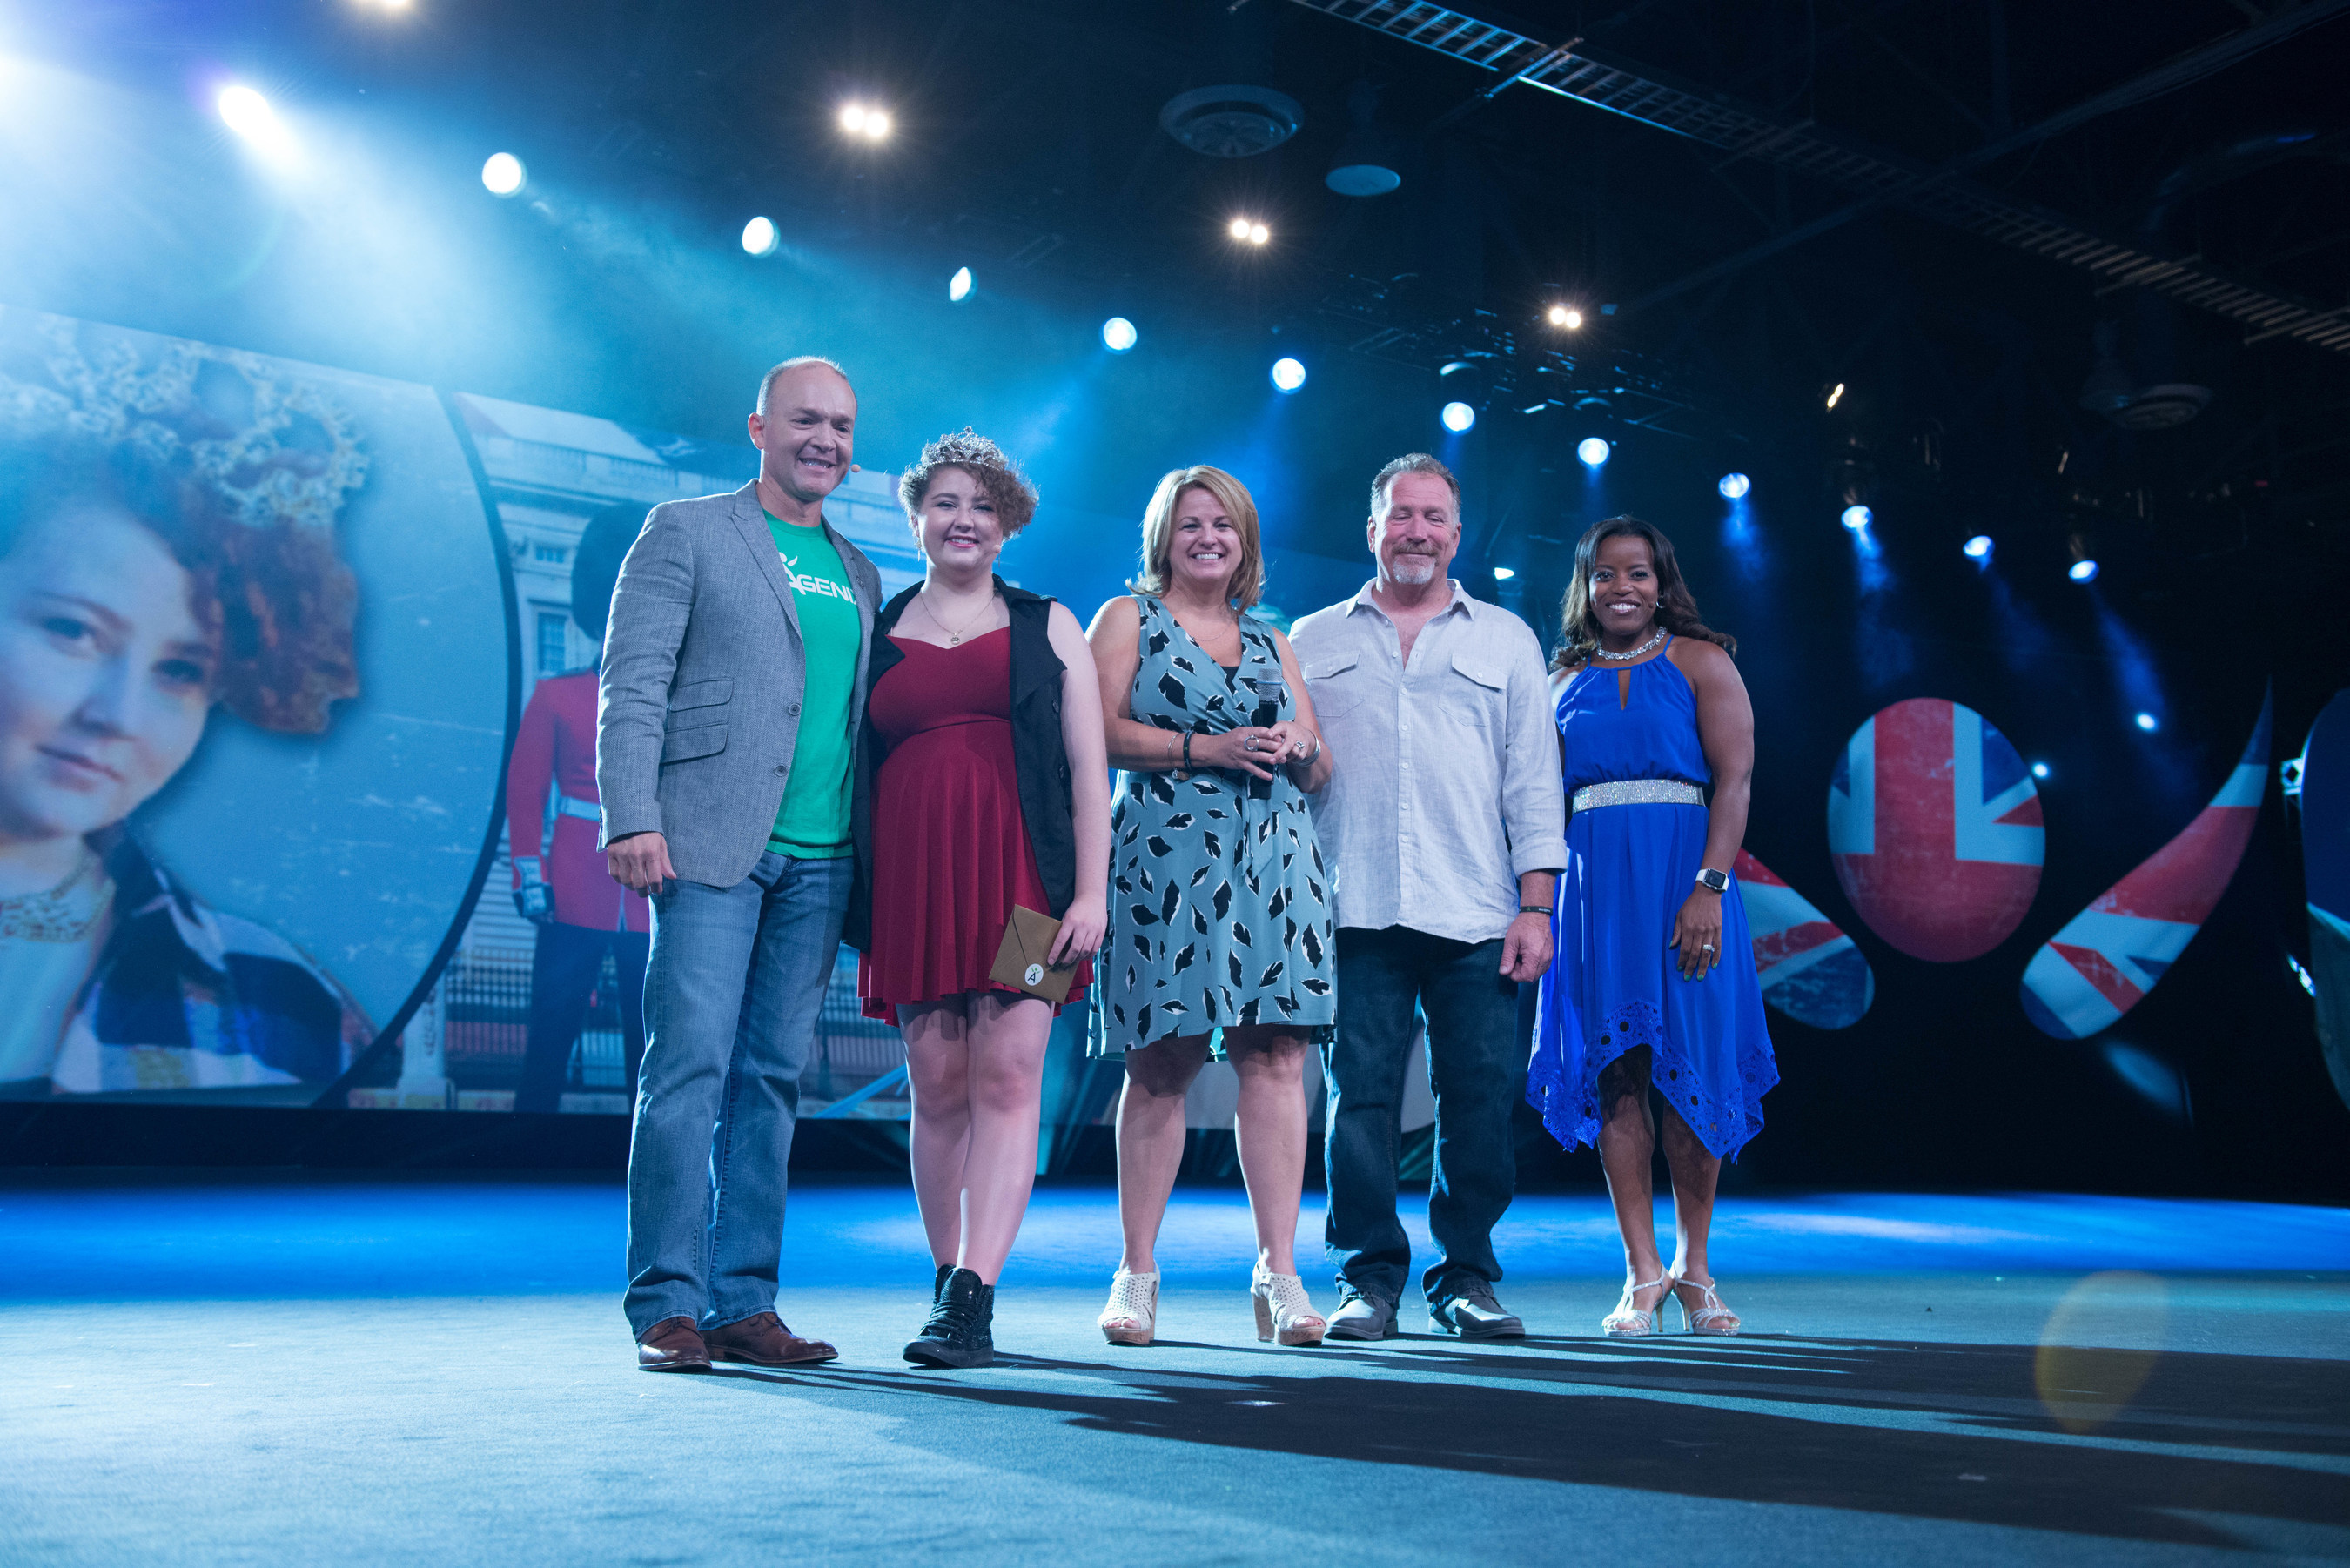 Isagenix Chief Sales and Marketing Officer, Travis Garza, Make-A-Wish and liver cancer survivor Jordyn Preston and parents Don and Beverly and Isagenix team member Elizabeth Martinsen who lost her child to cancer, celebrate the granting of Jordyn's wish - a trip to London at the company's annual 2016 Celebration event in Las Vegas.